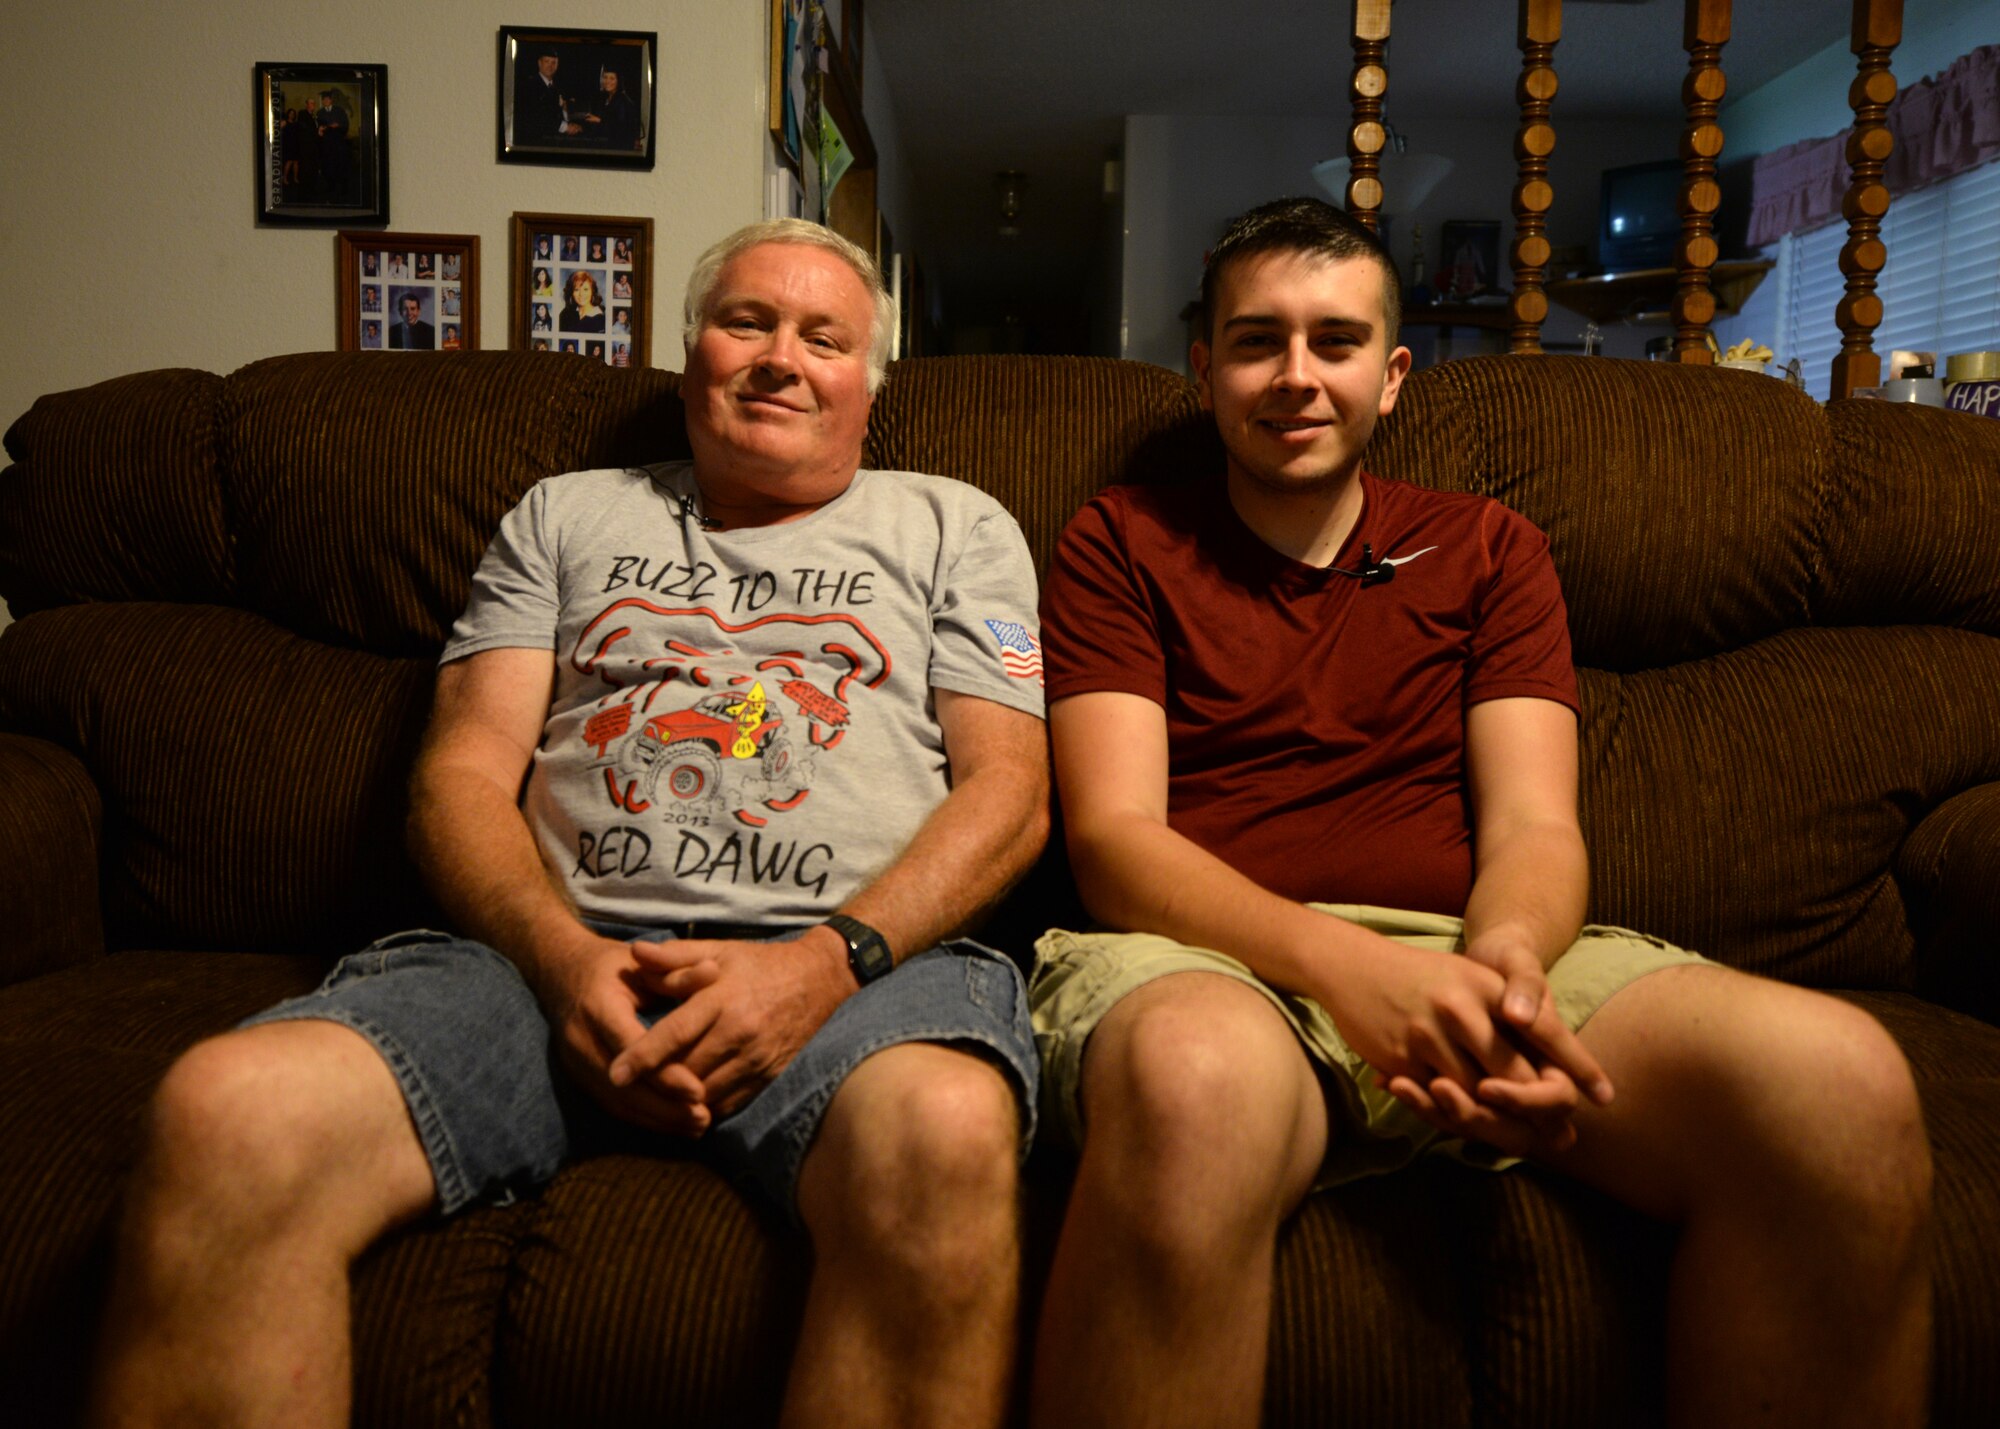 ALTUS, Okla. – Thomas Farley and his Father, Clensey, sit together on a couch at their home in Altus, Okla., Sept. 10, 2014. Thomas is being sworn into the U.S. Air Force by Thunderbird pilots during the 2014 Wings of Freedom Open House on Altus Air Force Base. (U.S. Air Force photo by Senior Airman Levin Boland/Released)